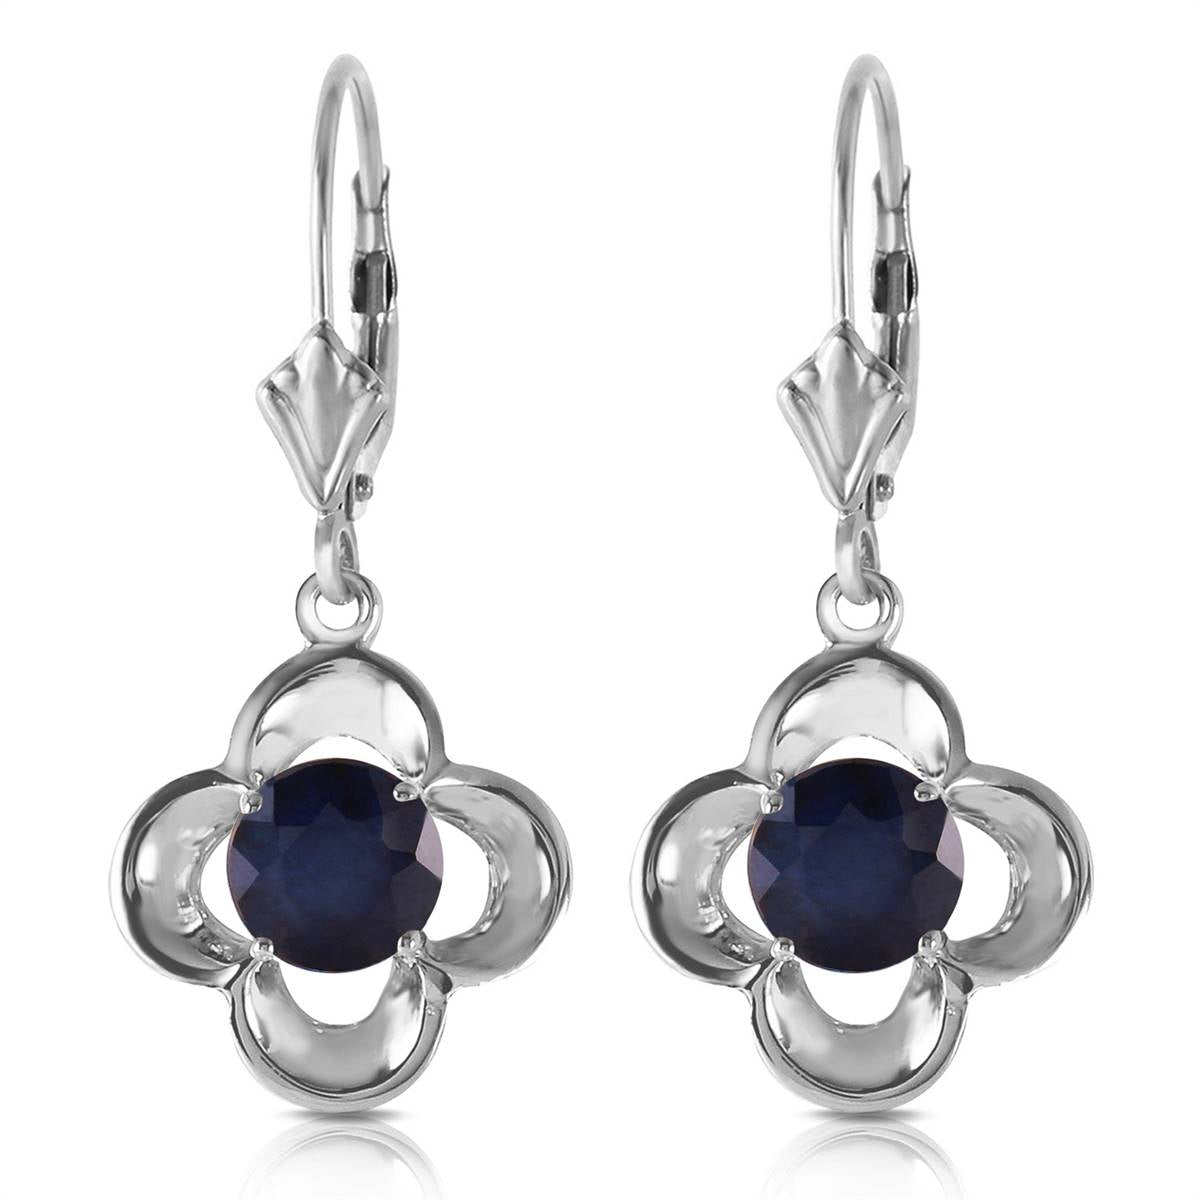 1.1 Carat 14K Solid White Gold Leverback Earrings Natural Sapphire